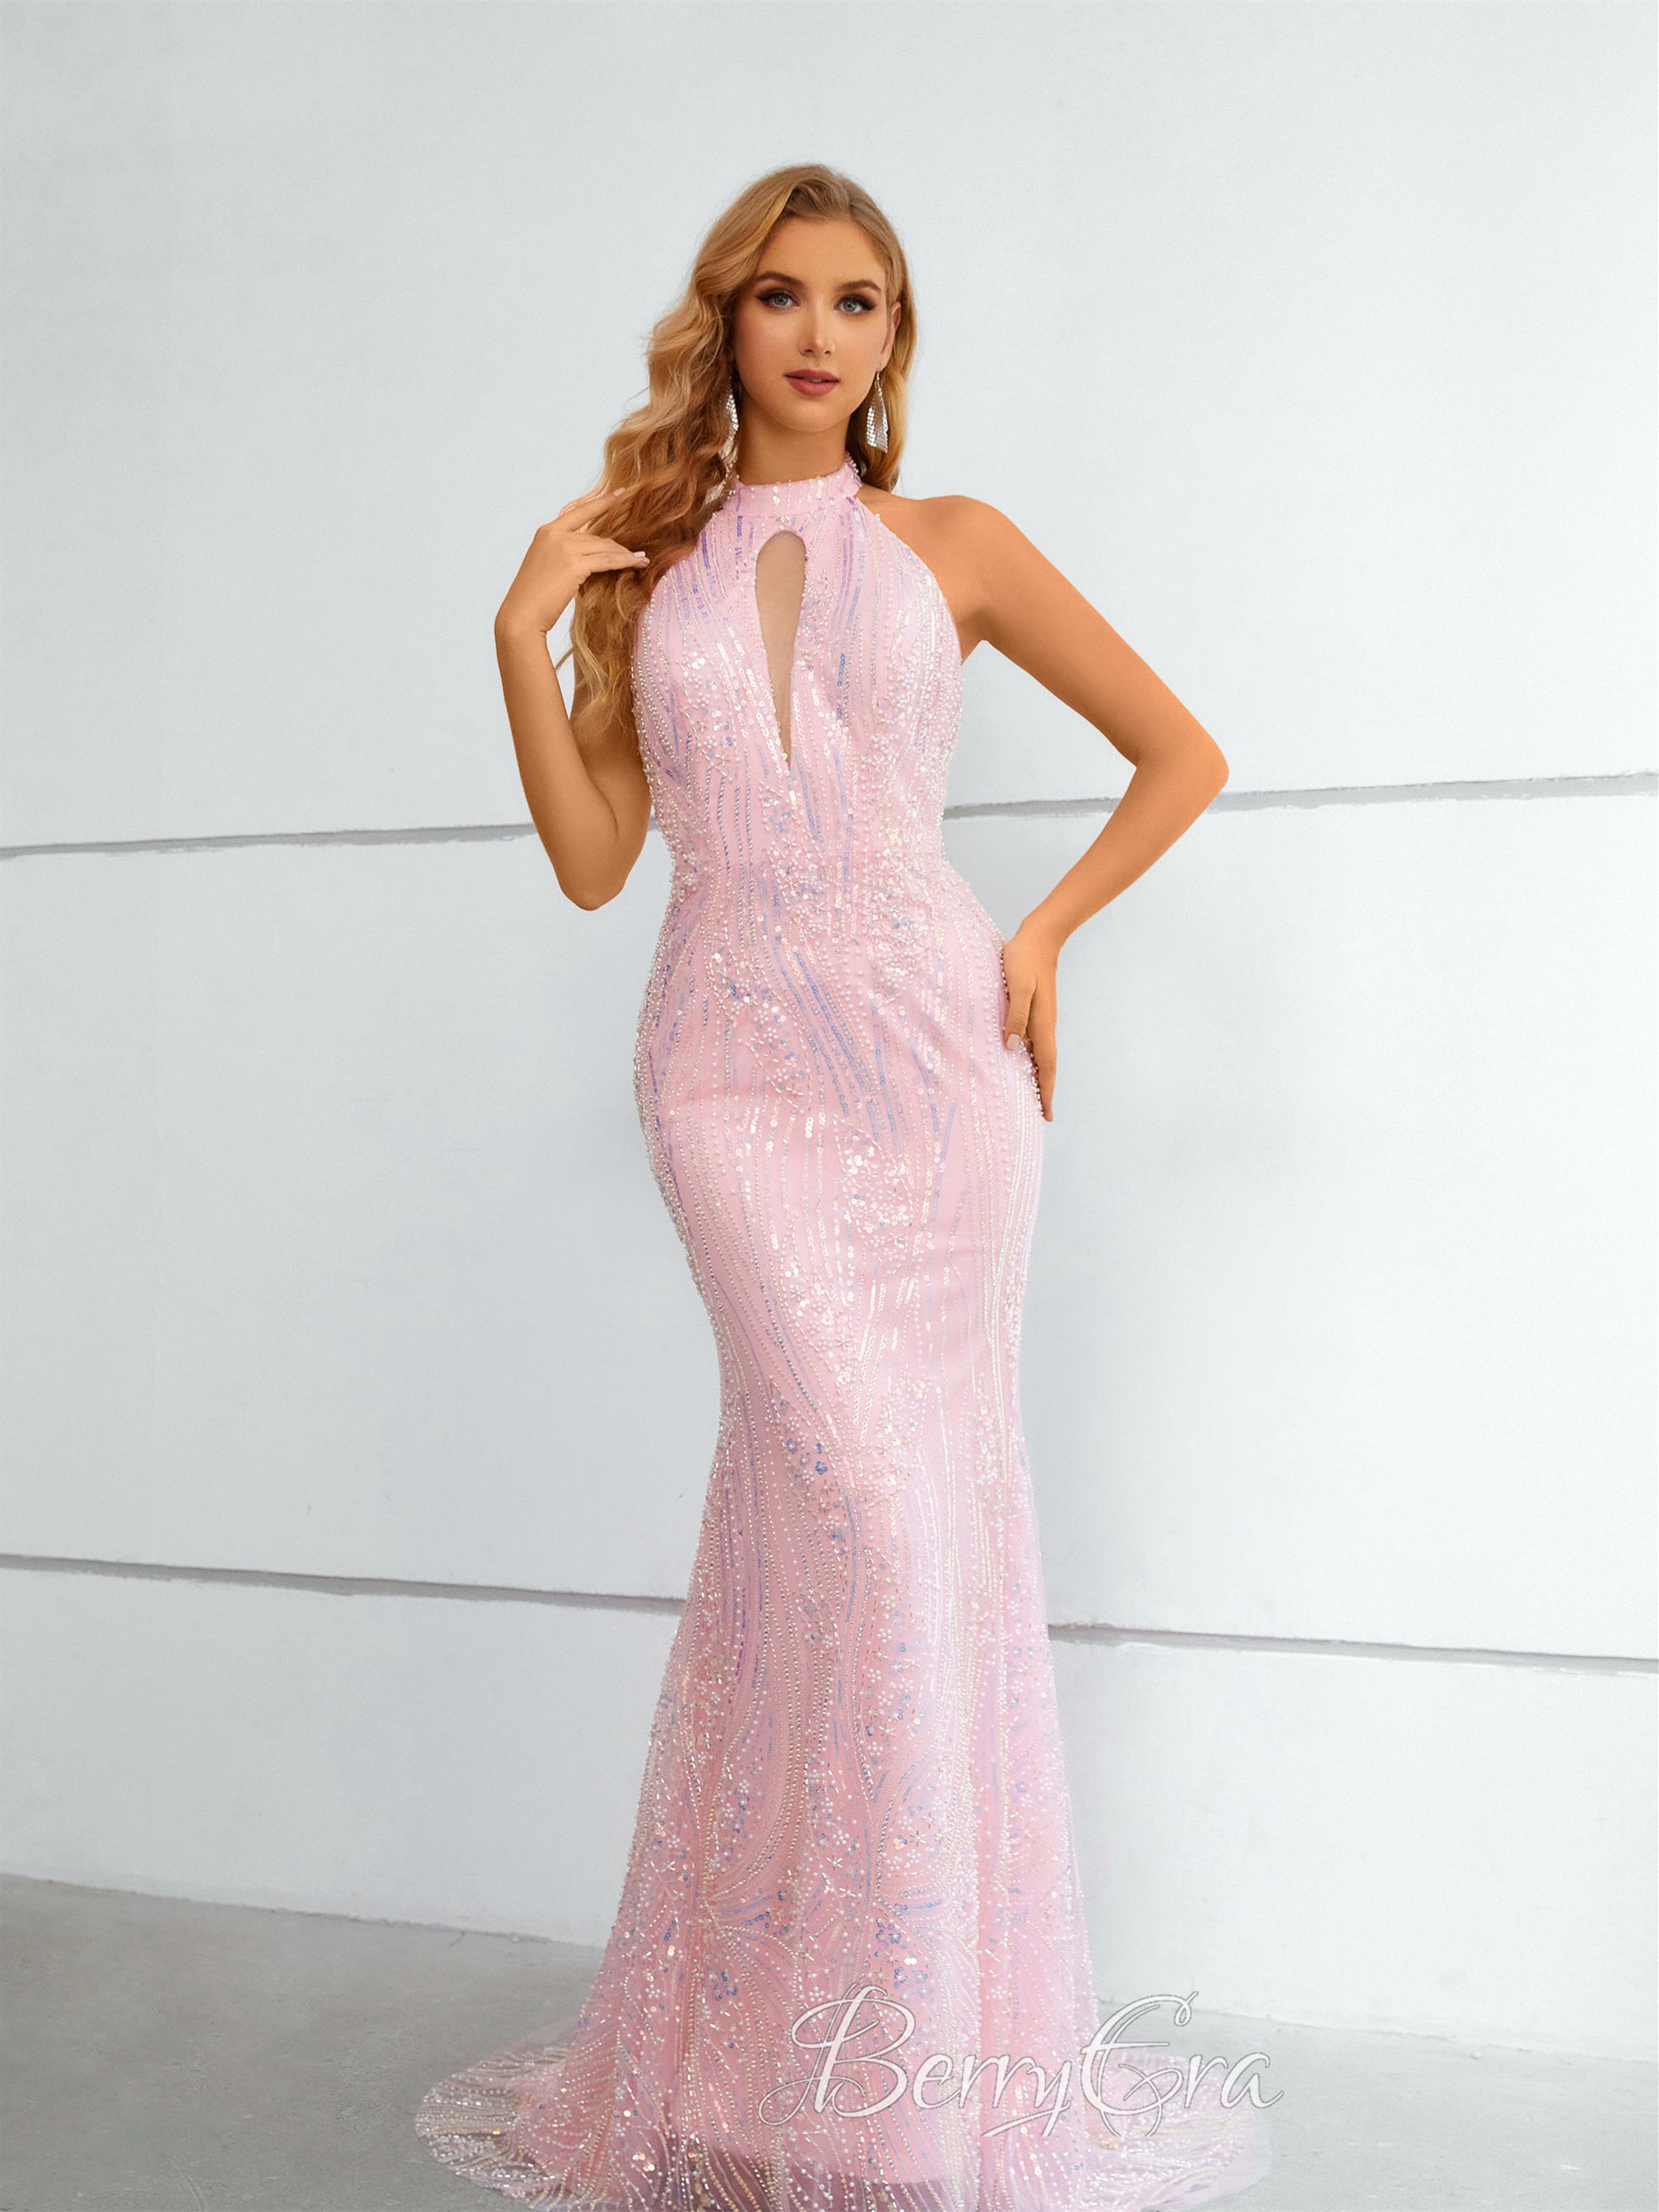 Halter Sequin Lace Mermaid Prom Dresses, Pink Prom Dresses, Affordable Prom Dresses, 2023 Prom Dresses